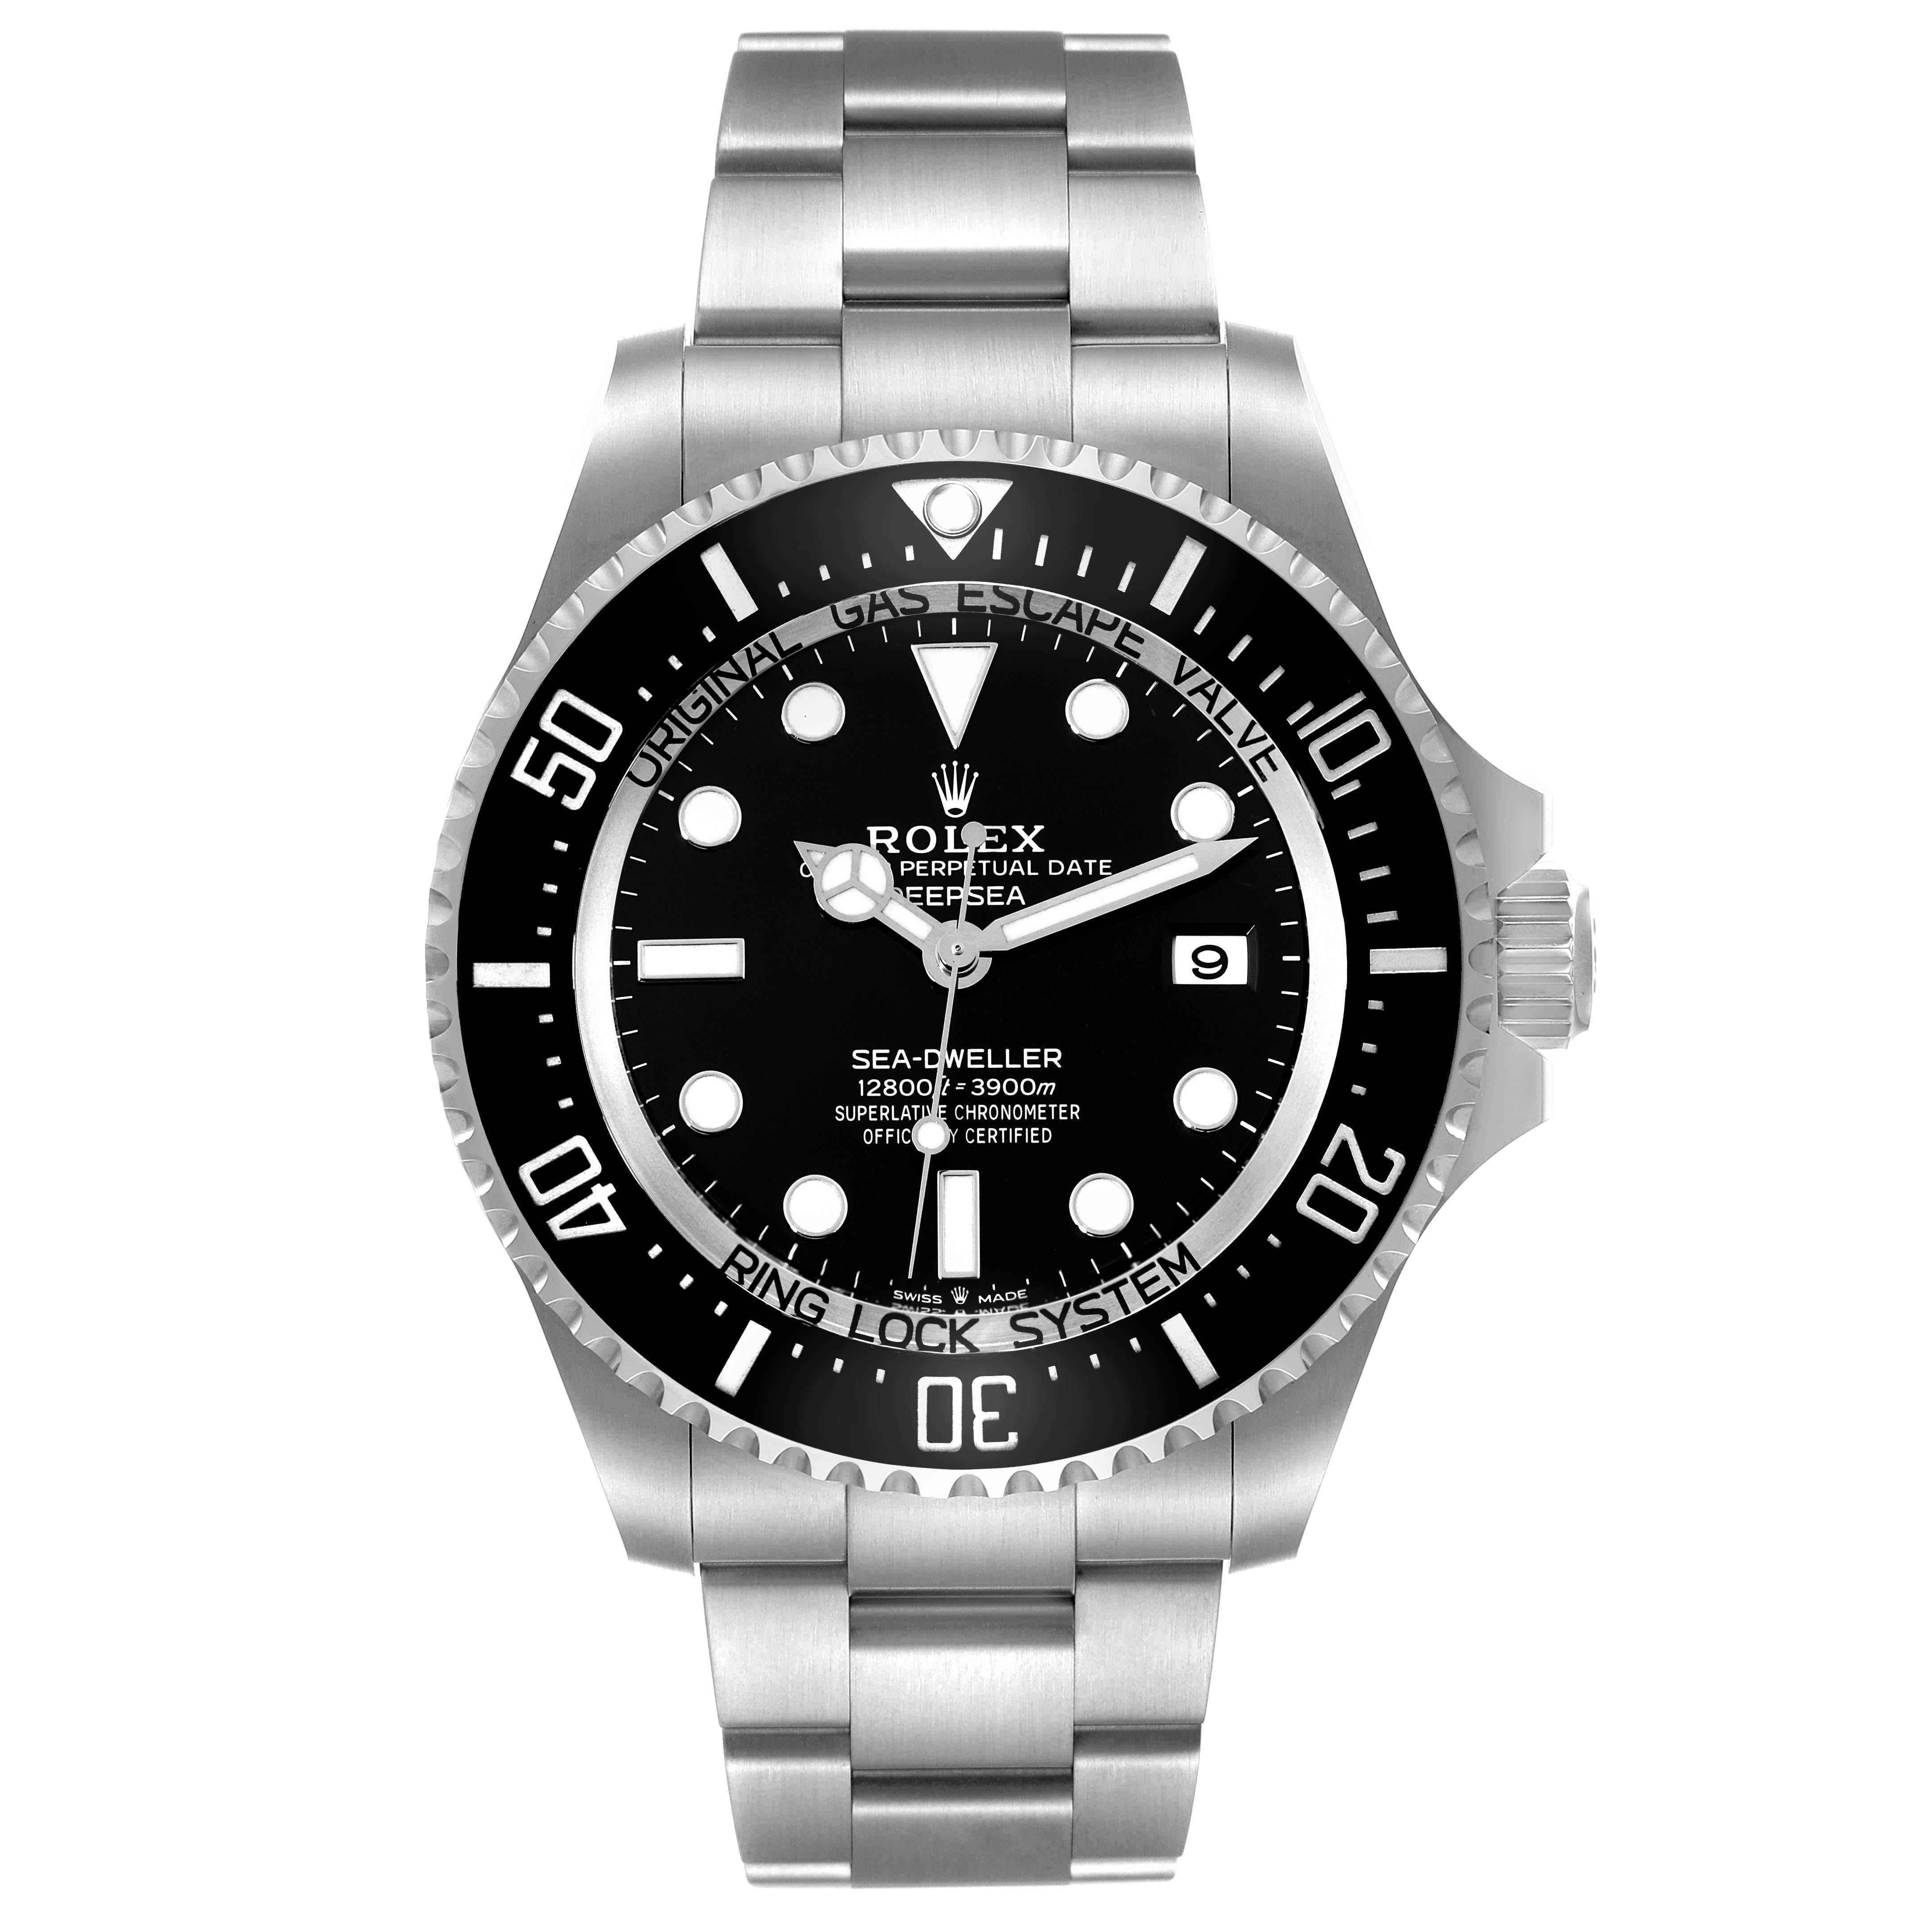 Rolex Seadweller Deepsea 44 Black Dial Steel Mens Watch 136660 Unworn. Officially certified chronometer automatic self-winding movement. Stainless steel oyster case 44 mm in diameter. Rolex logo on the crown. Special time-lapse unidirectional